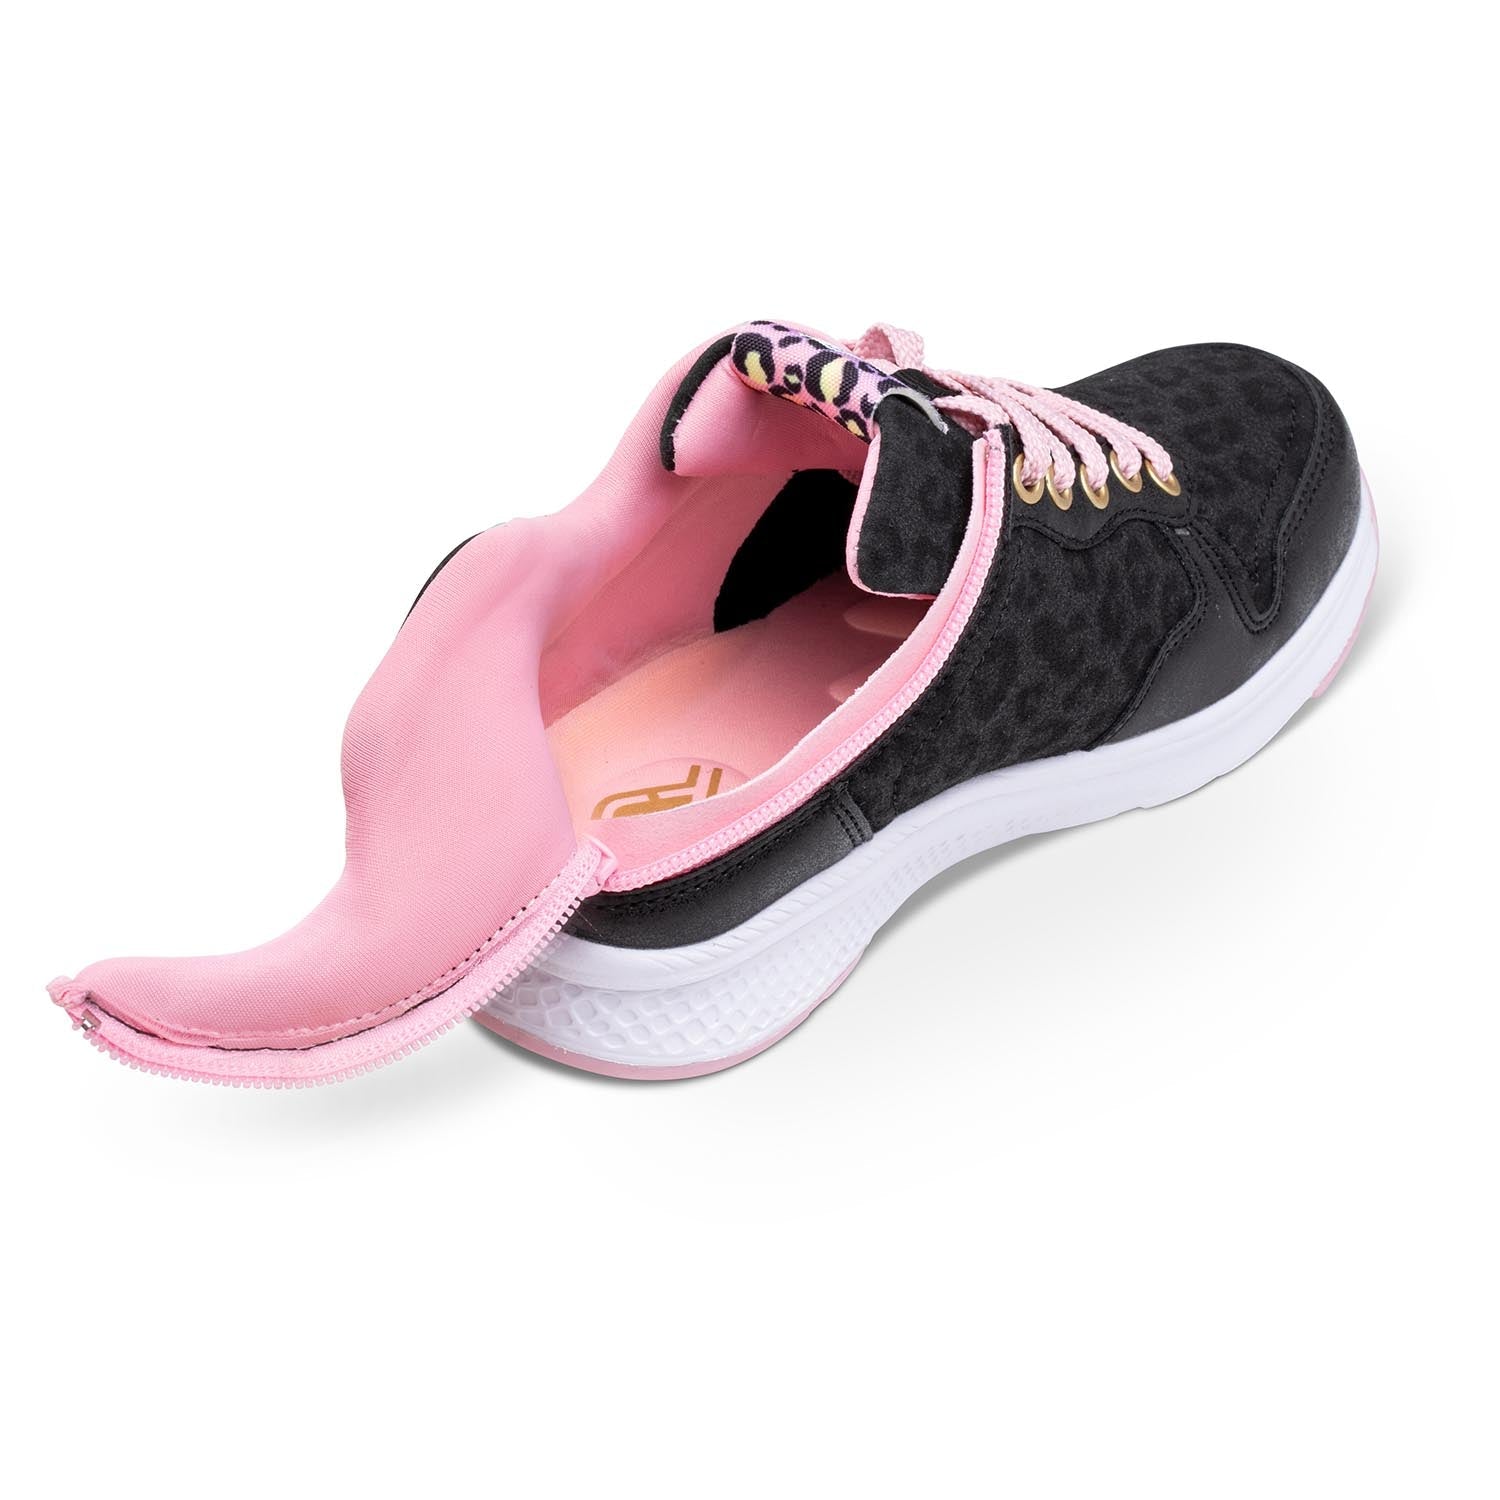 Black leopard kids shoe unzipped with rear zipper access and light pink interior padding.